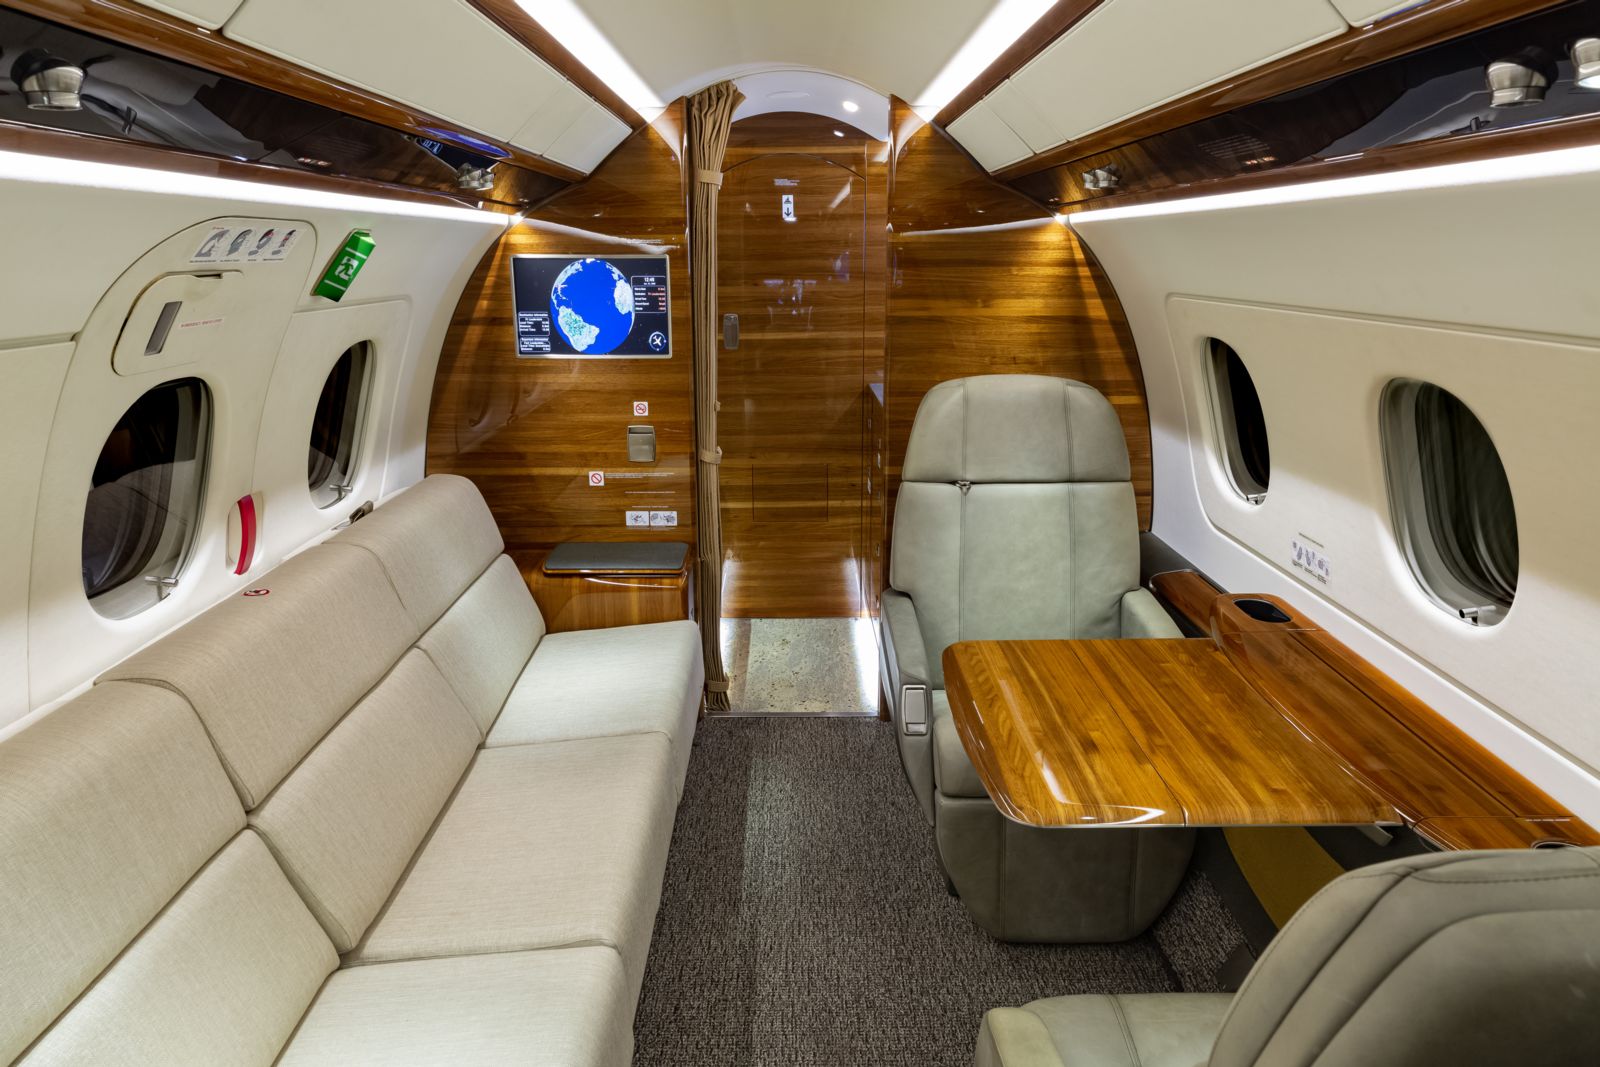 Embraer Legacy 500  S/N 55000043 for sale | gallery image: /userfiles/images/Legacy500_SN43/bfp_9778.jpg